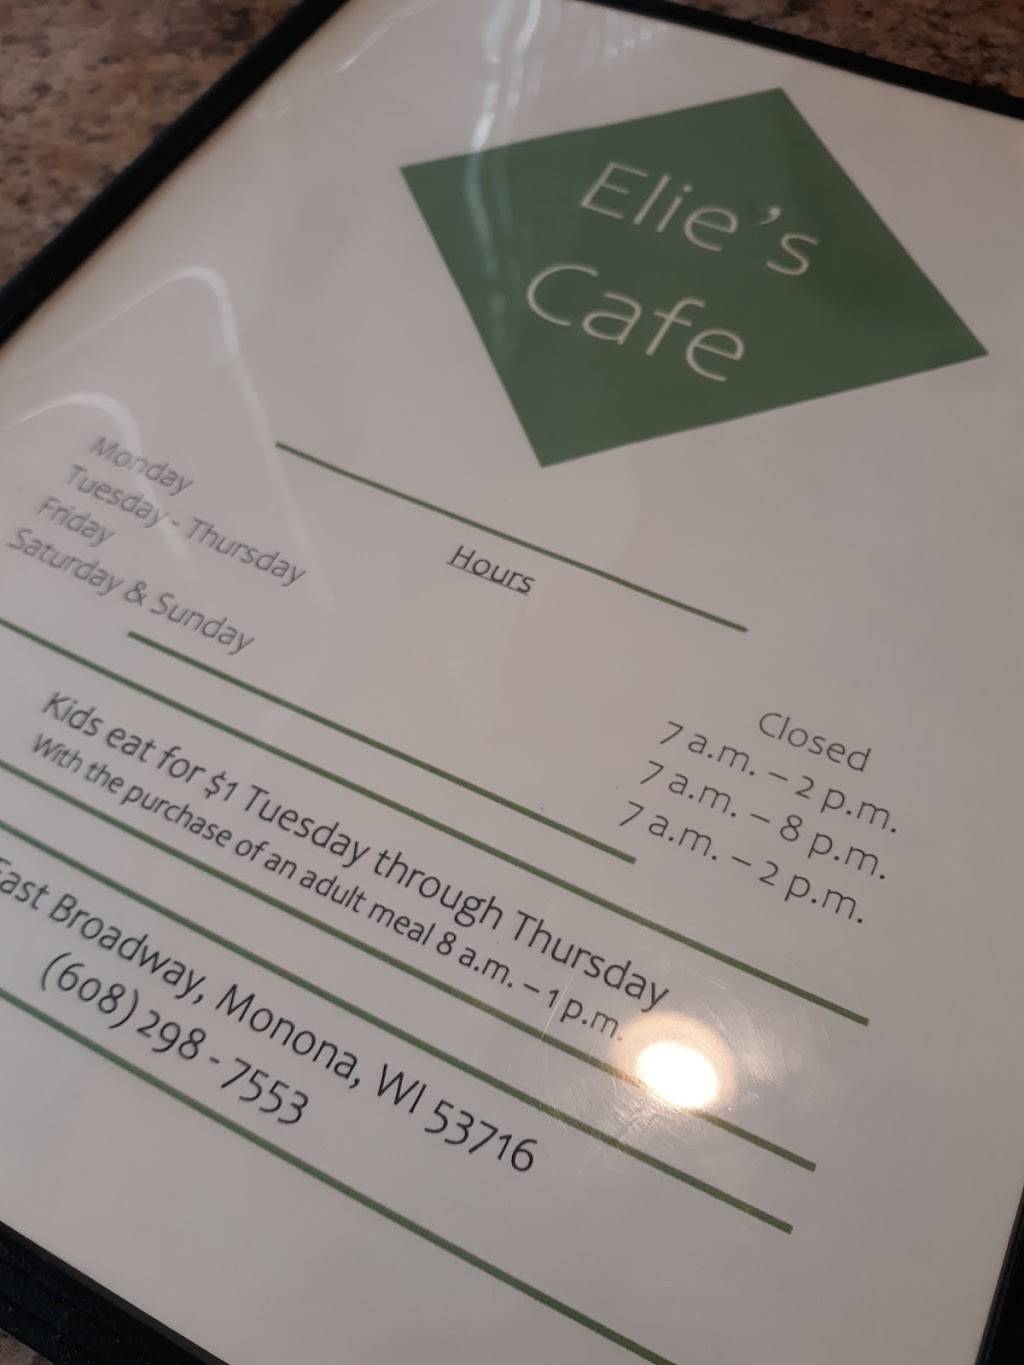 Elies Cafe | restaurant | 909 E Broadway, Madison, WI 53716, USA | 6082987553 OR +1 608-298-7553